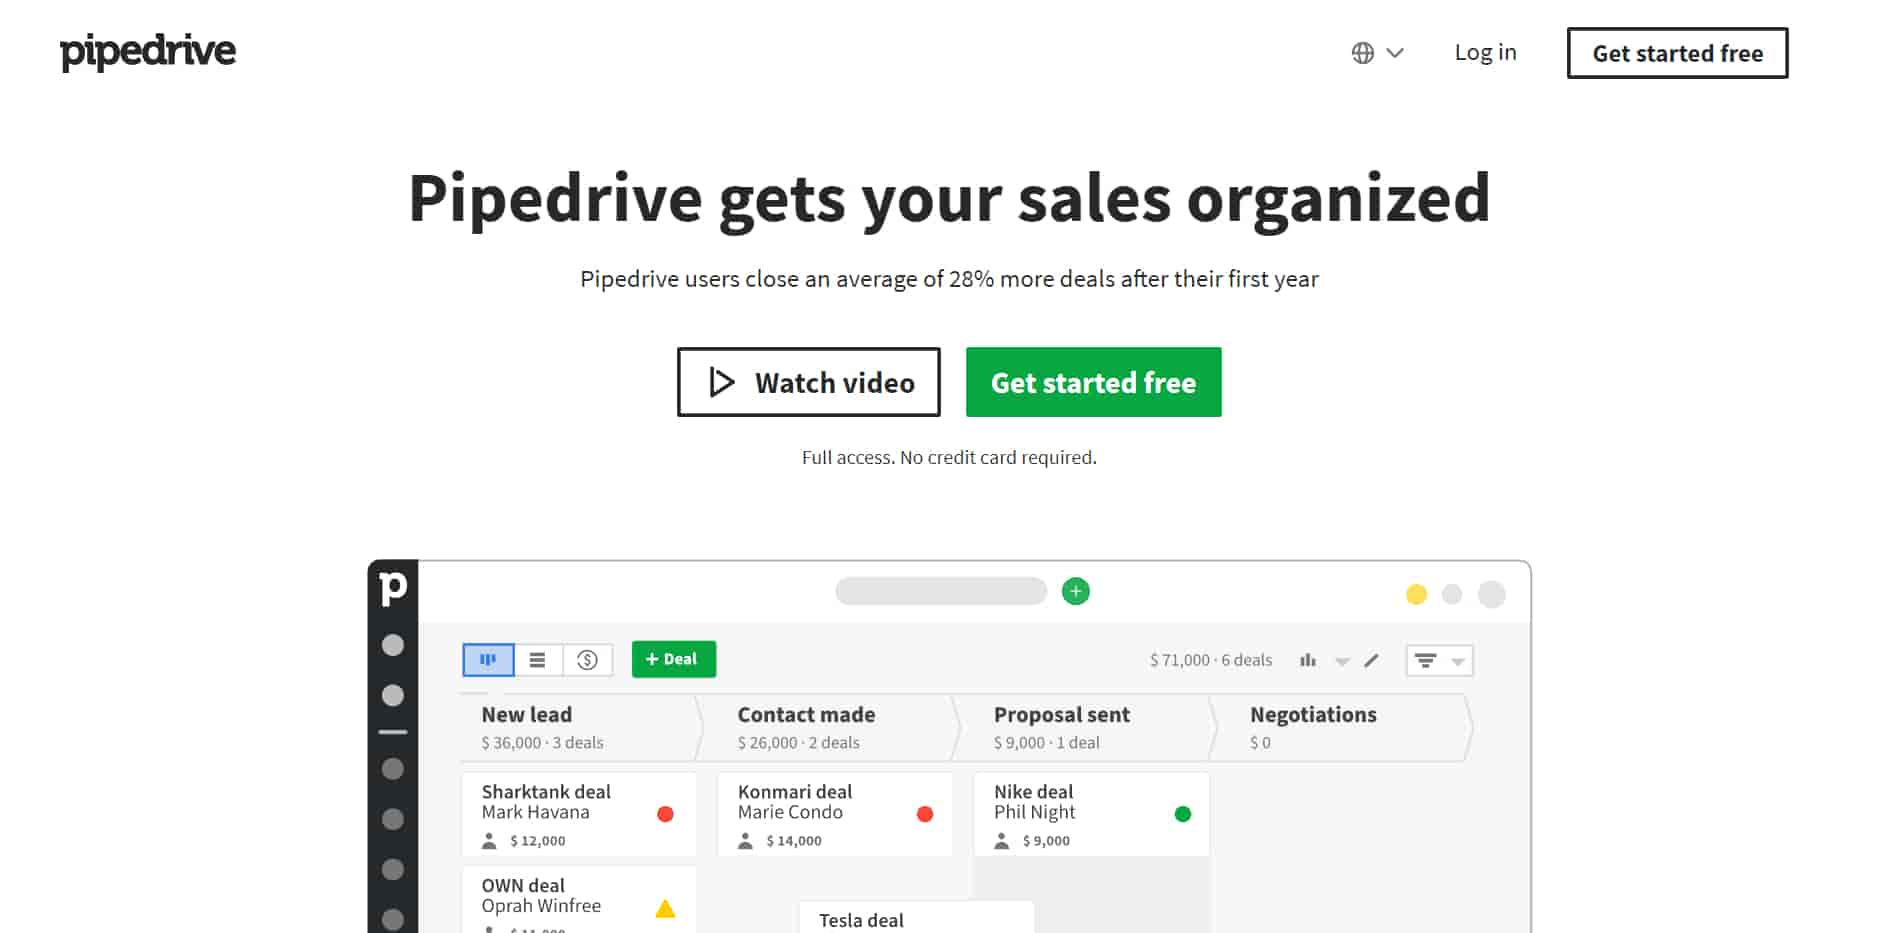 Pipedrive is the best CRM for small business that wants their sales and important activites organized